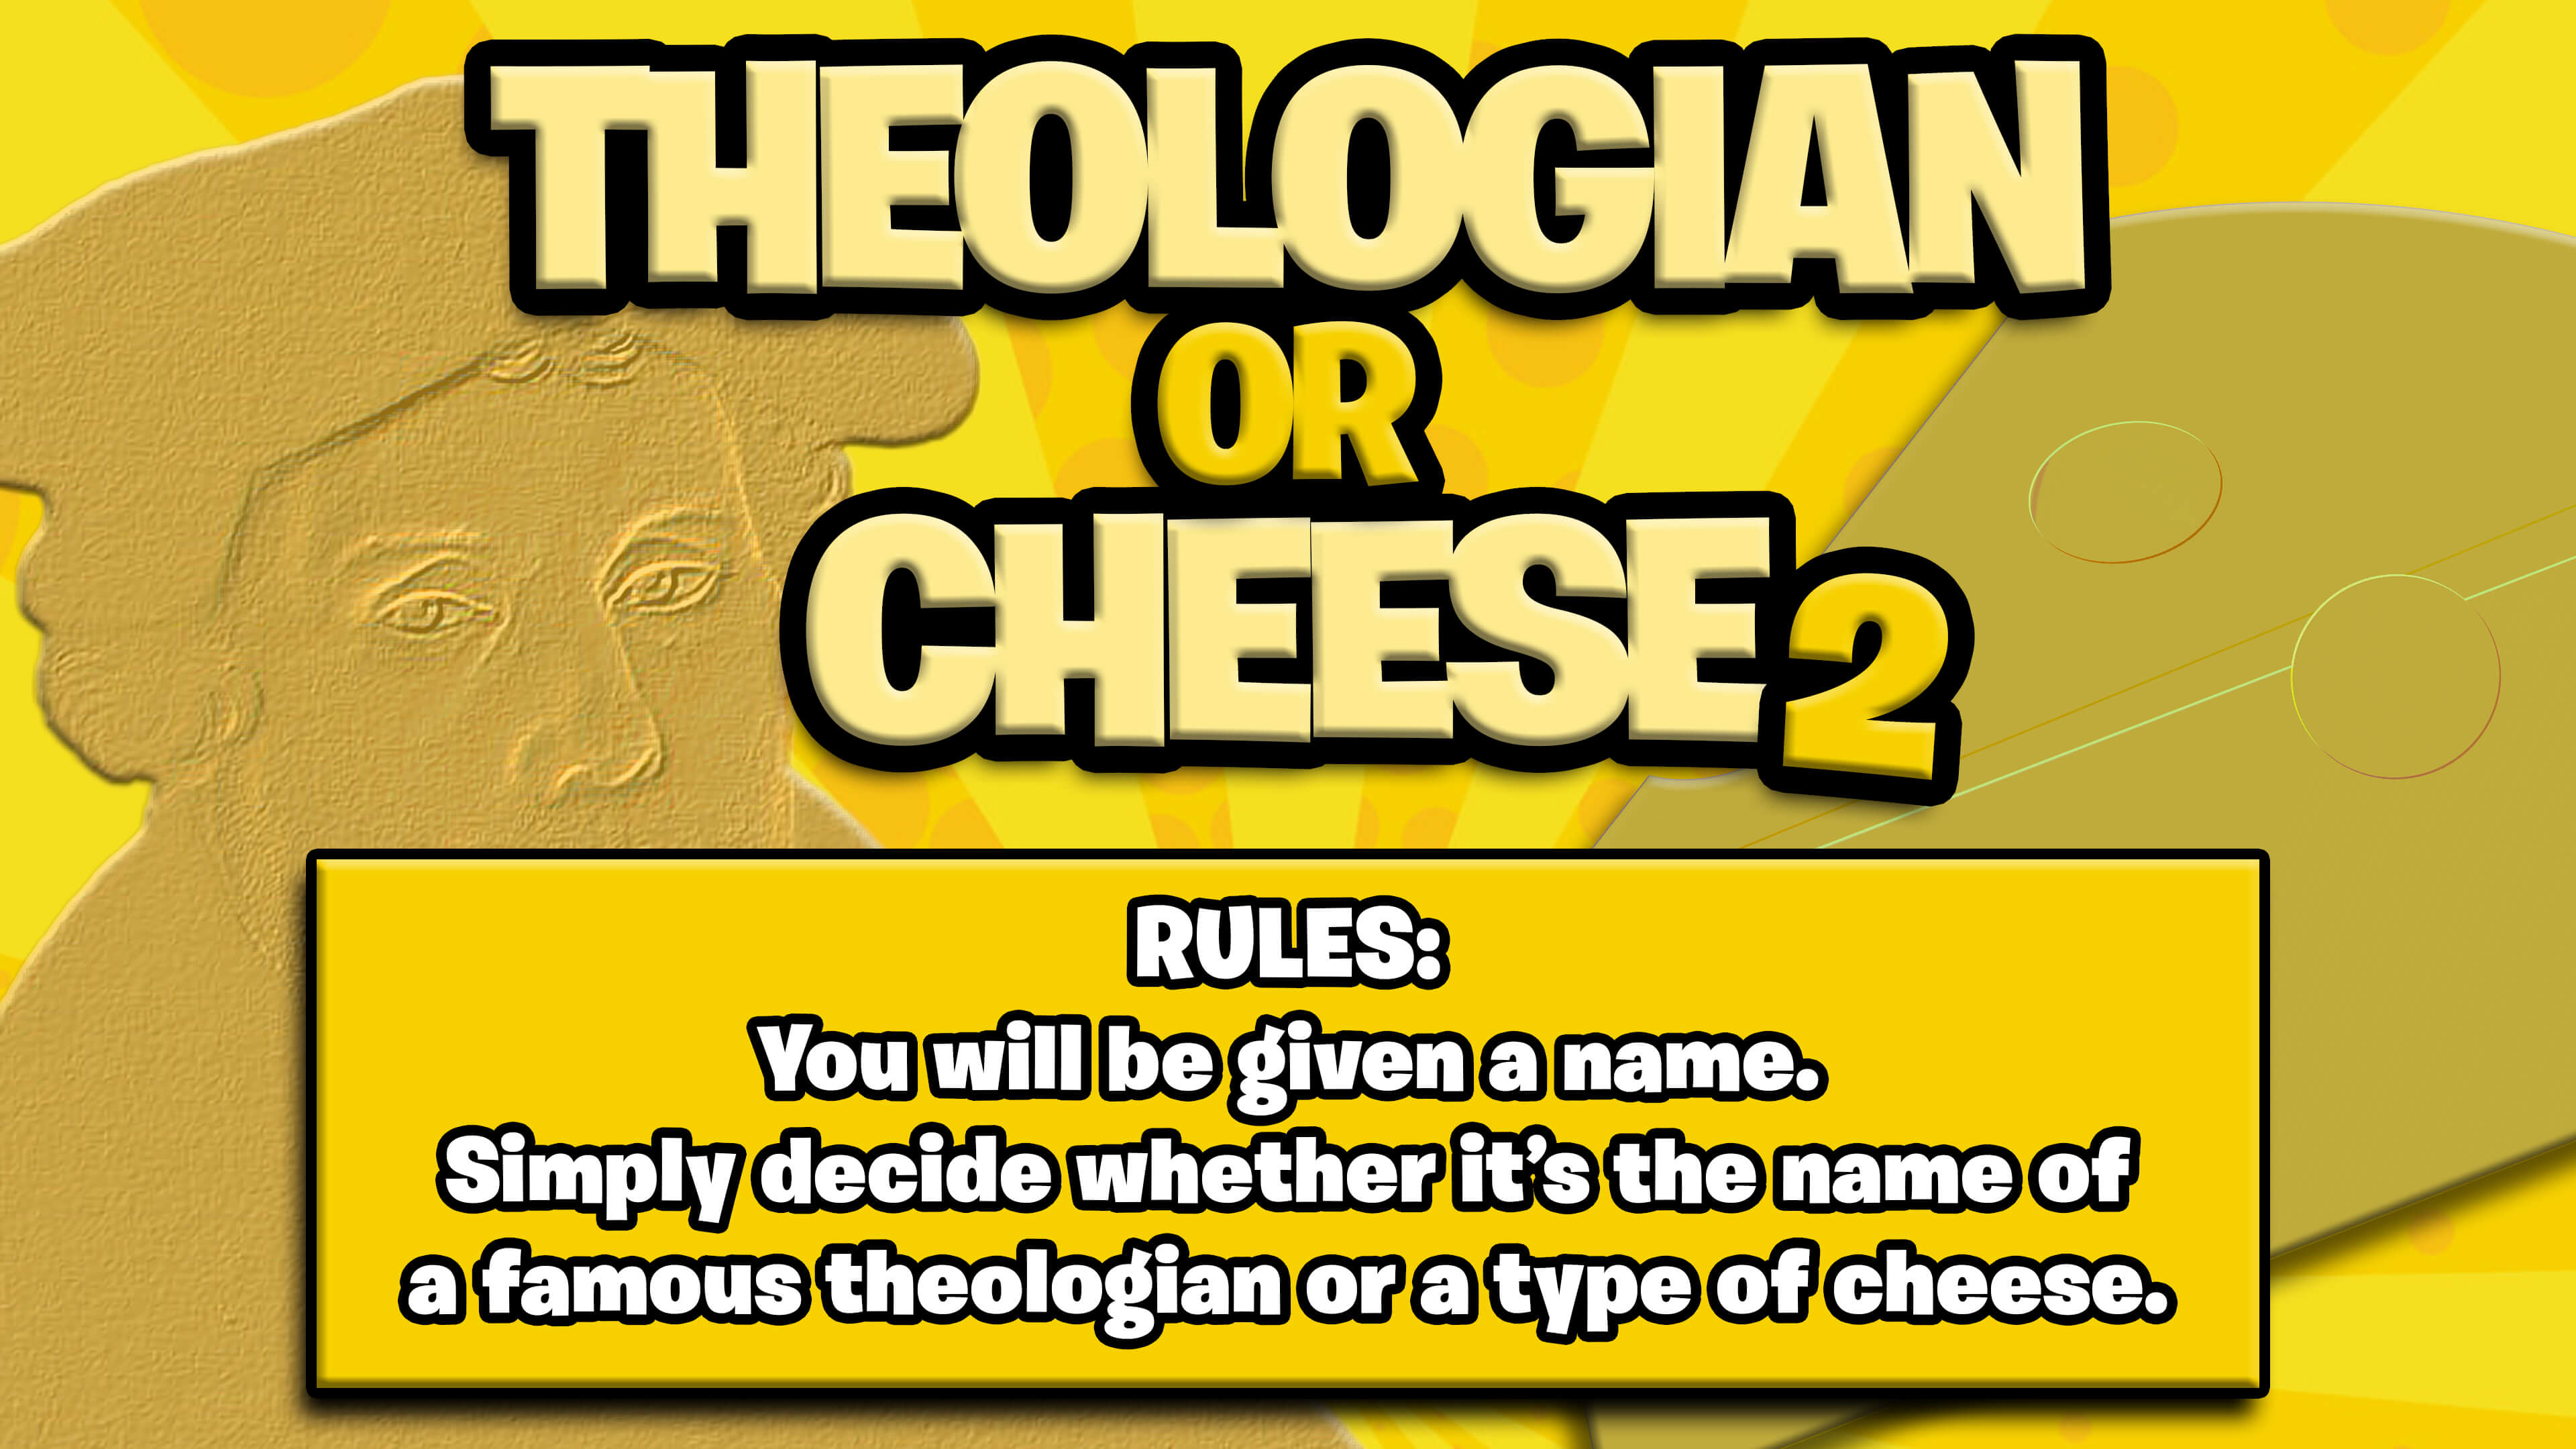 Theologian or Cheese 2